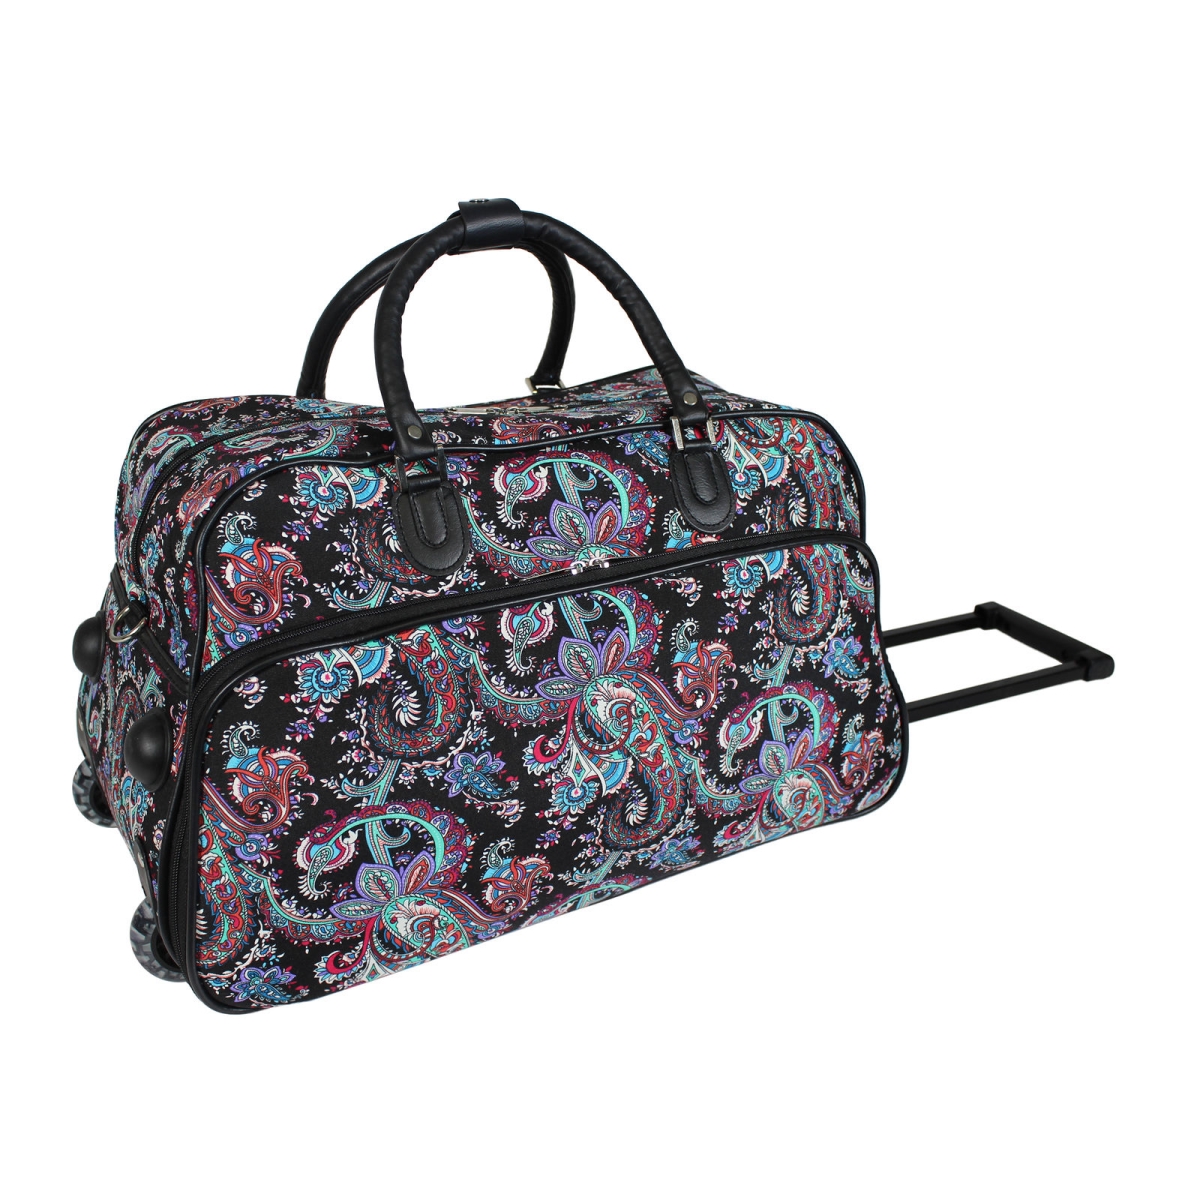 8112022-207 21 In. Paisley Carry-on Rolling Duffel Bag